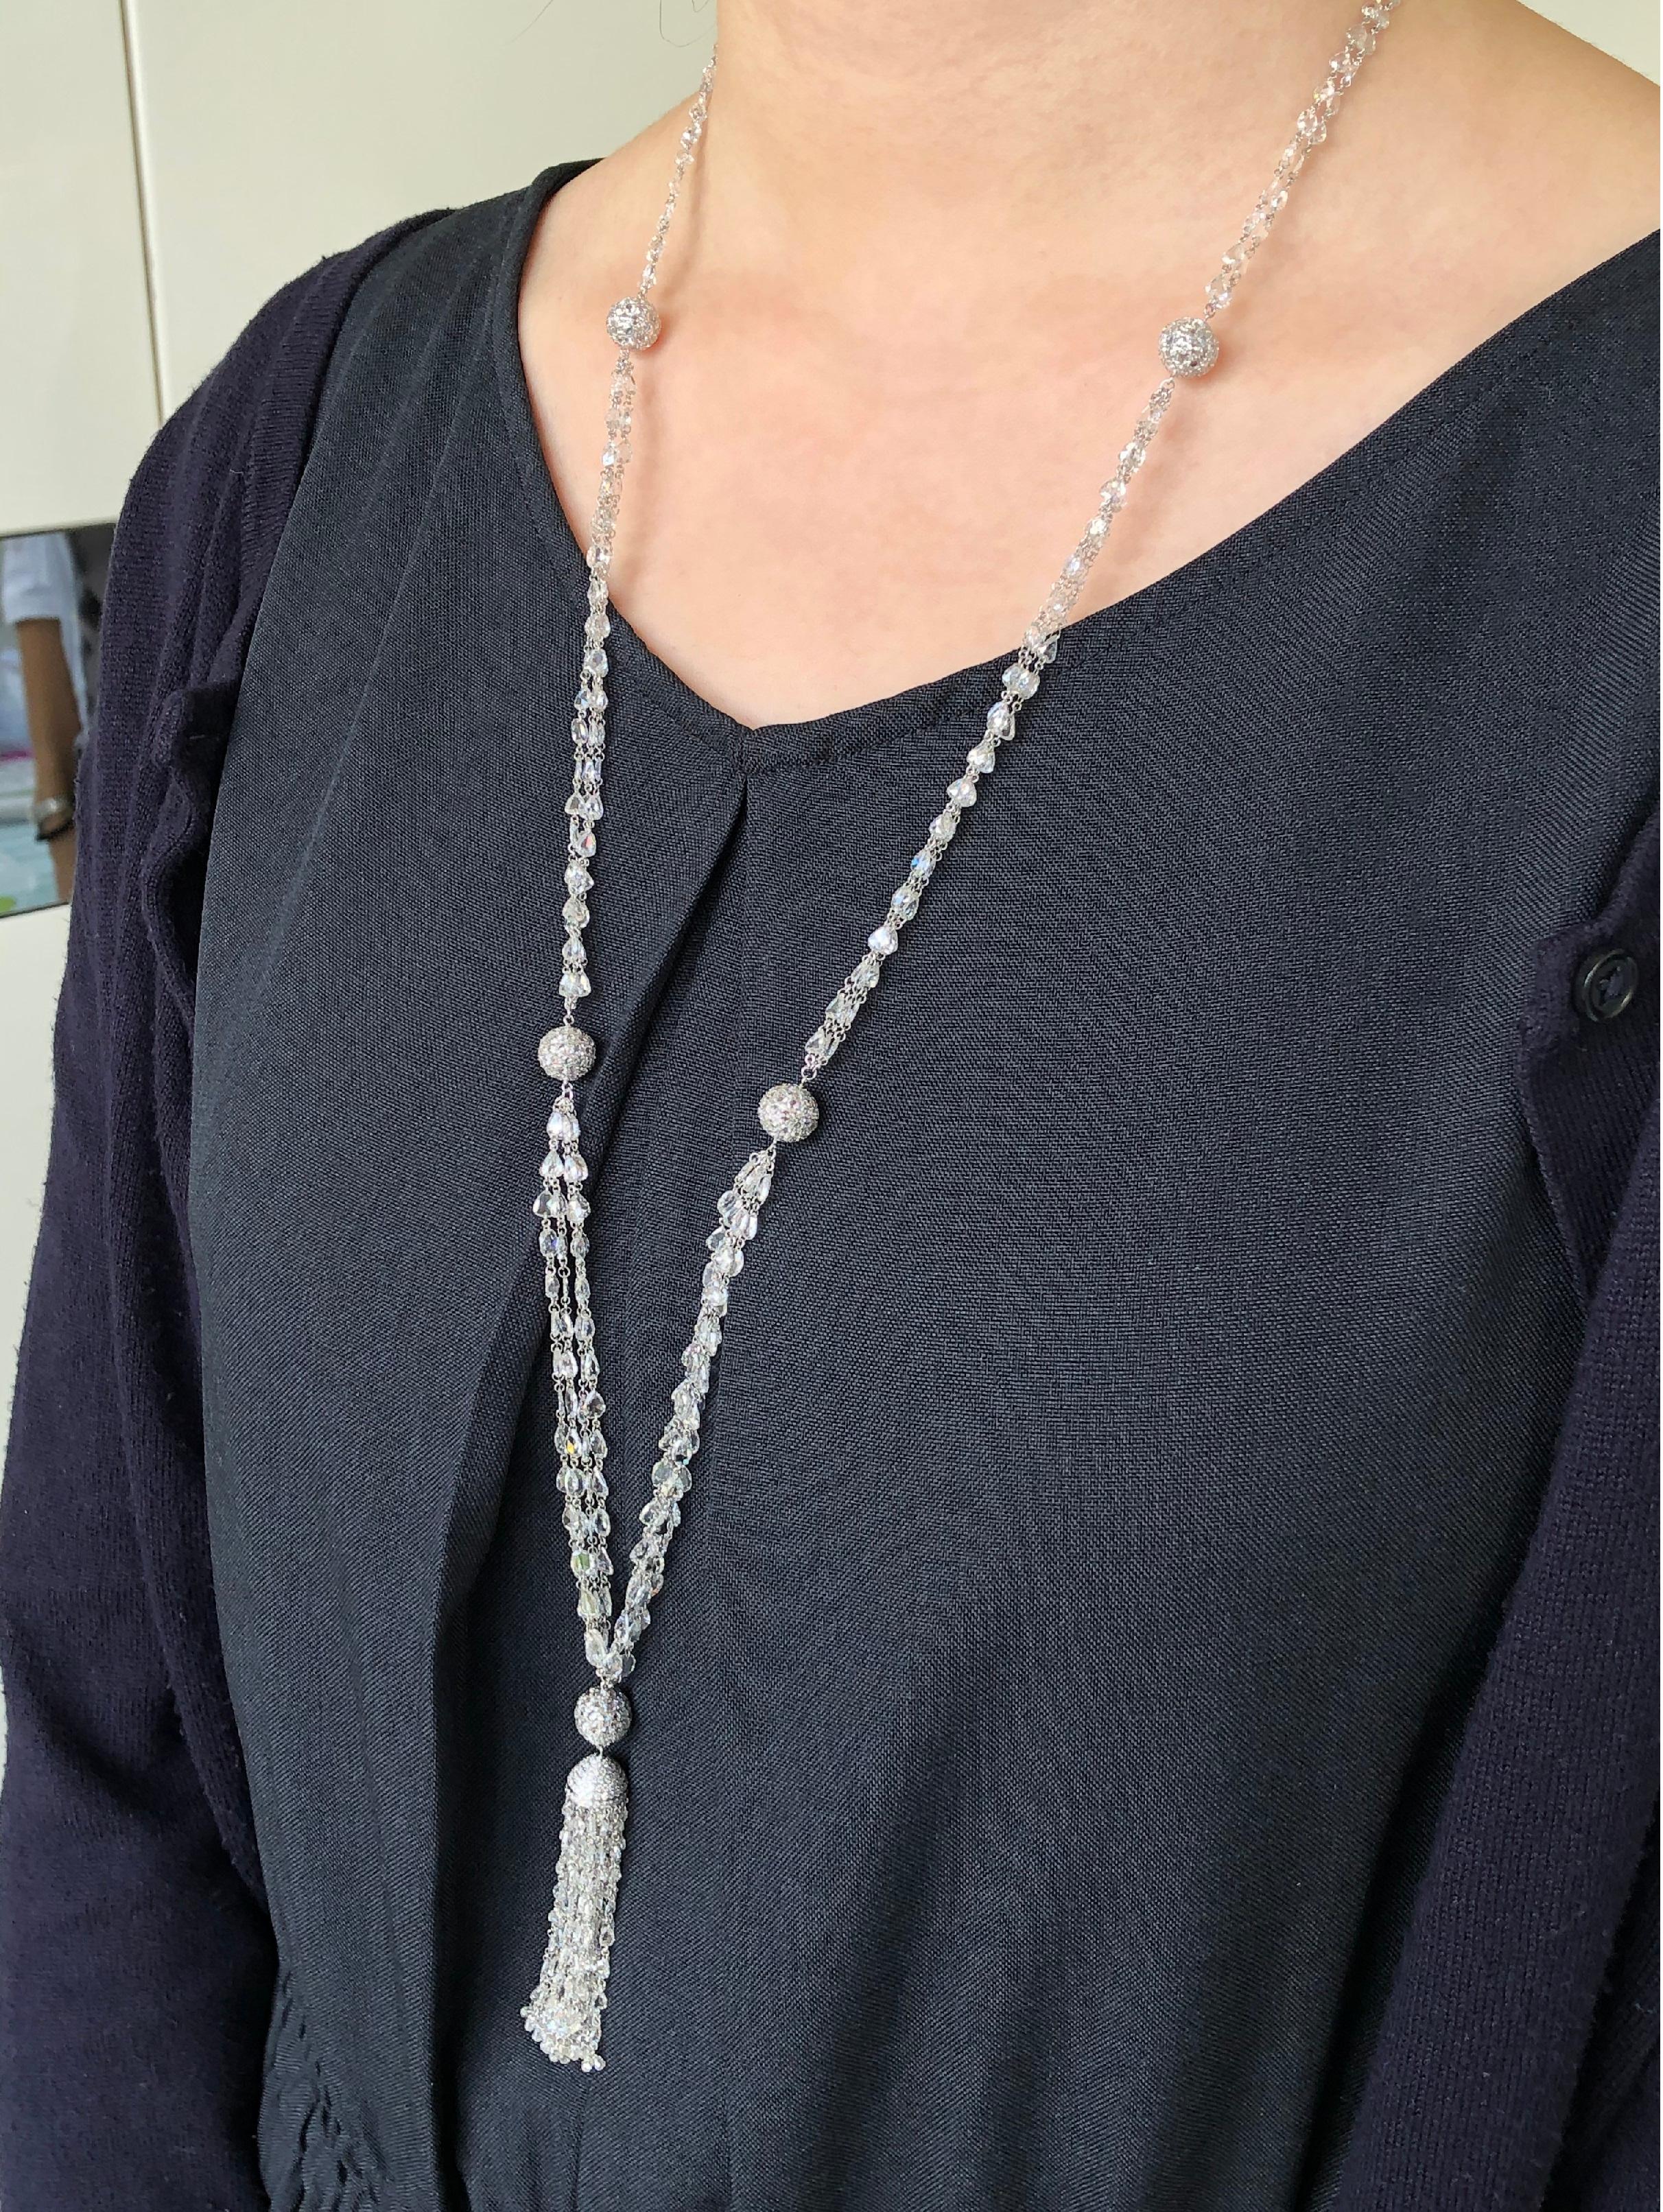 JR 59.63 Carat Rose Cut Diamond Tassel Necklace

This wonderful tassel necklace is enough to make you dazzle as well. They're fun, and they're lively. Drilled Diamond Rose Cut Necklace linked by 18 karat White gold and 59.63 carats of White